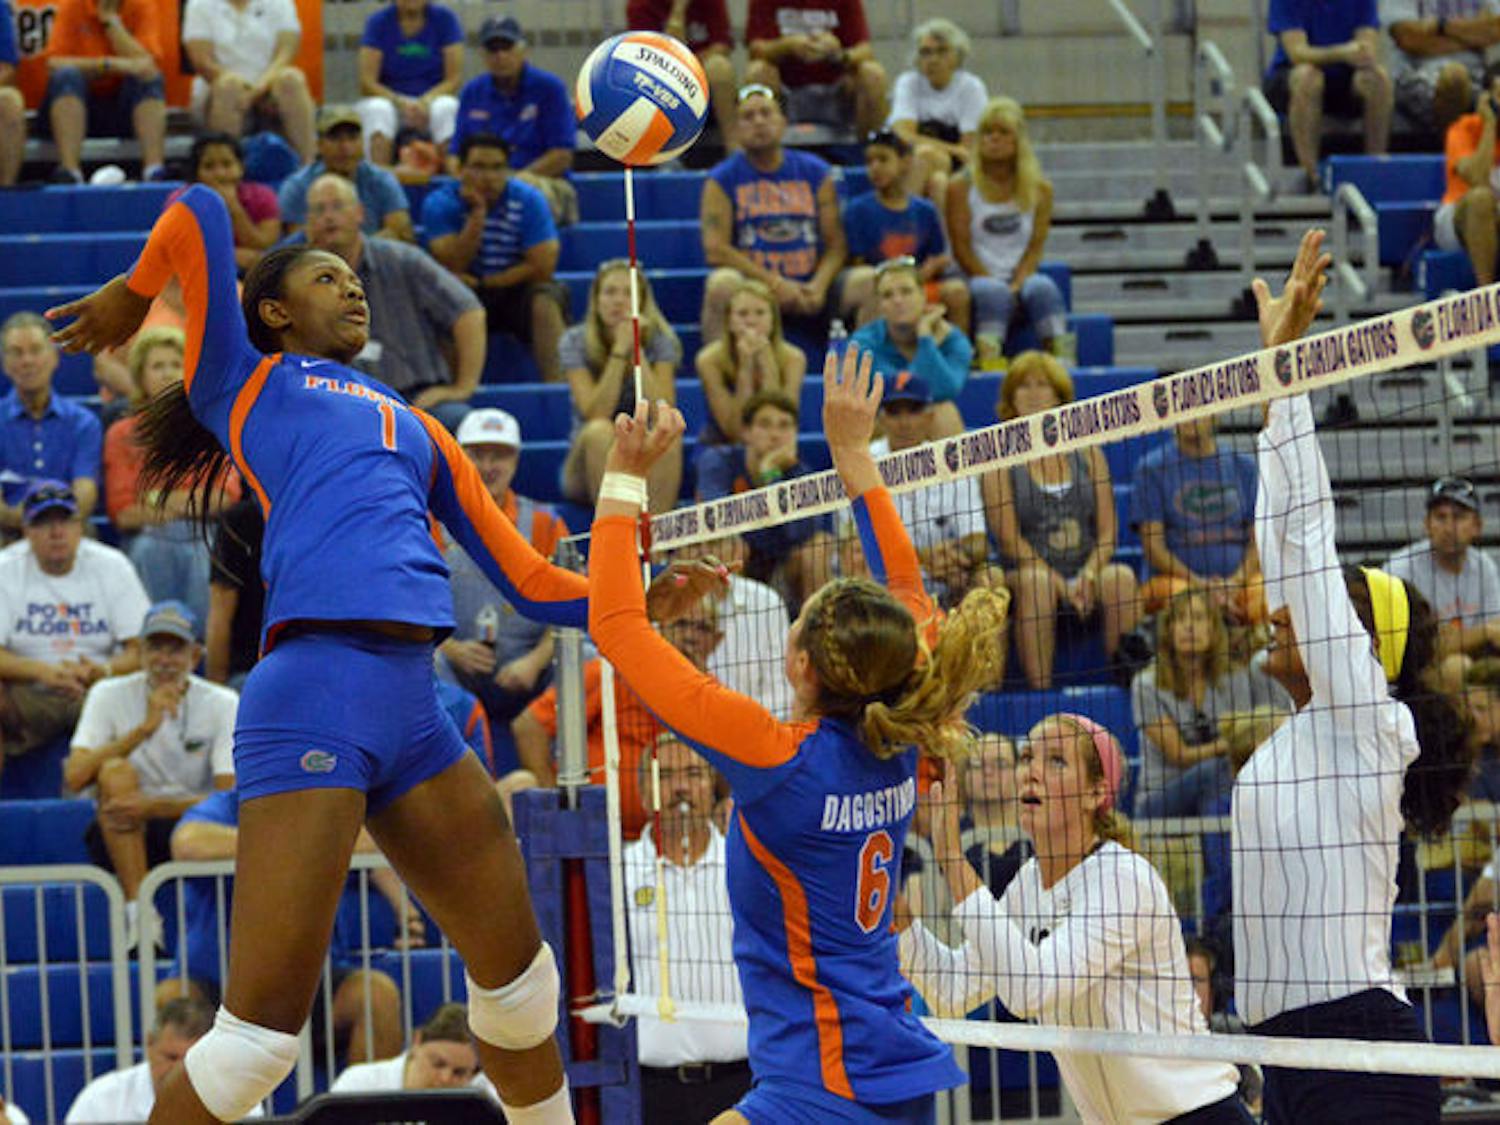 Senior middle blocker Rhamat Alhassan swings for a kill during Florida's 3-0 win against Georgia Southern on&nbsp;Aug. 29&nbsp;in the O'Connell Center.